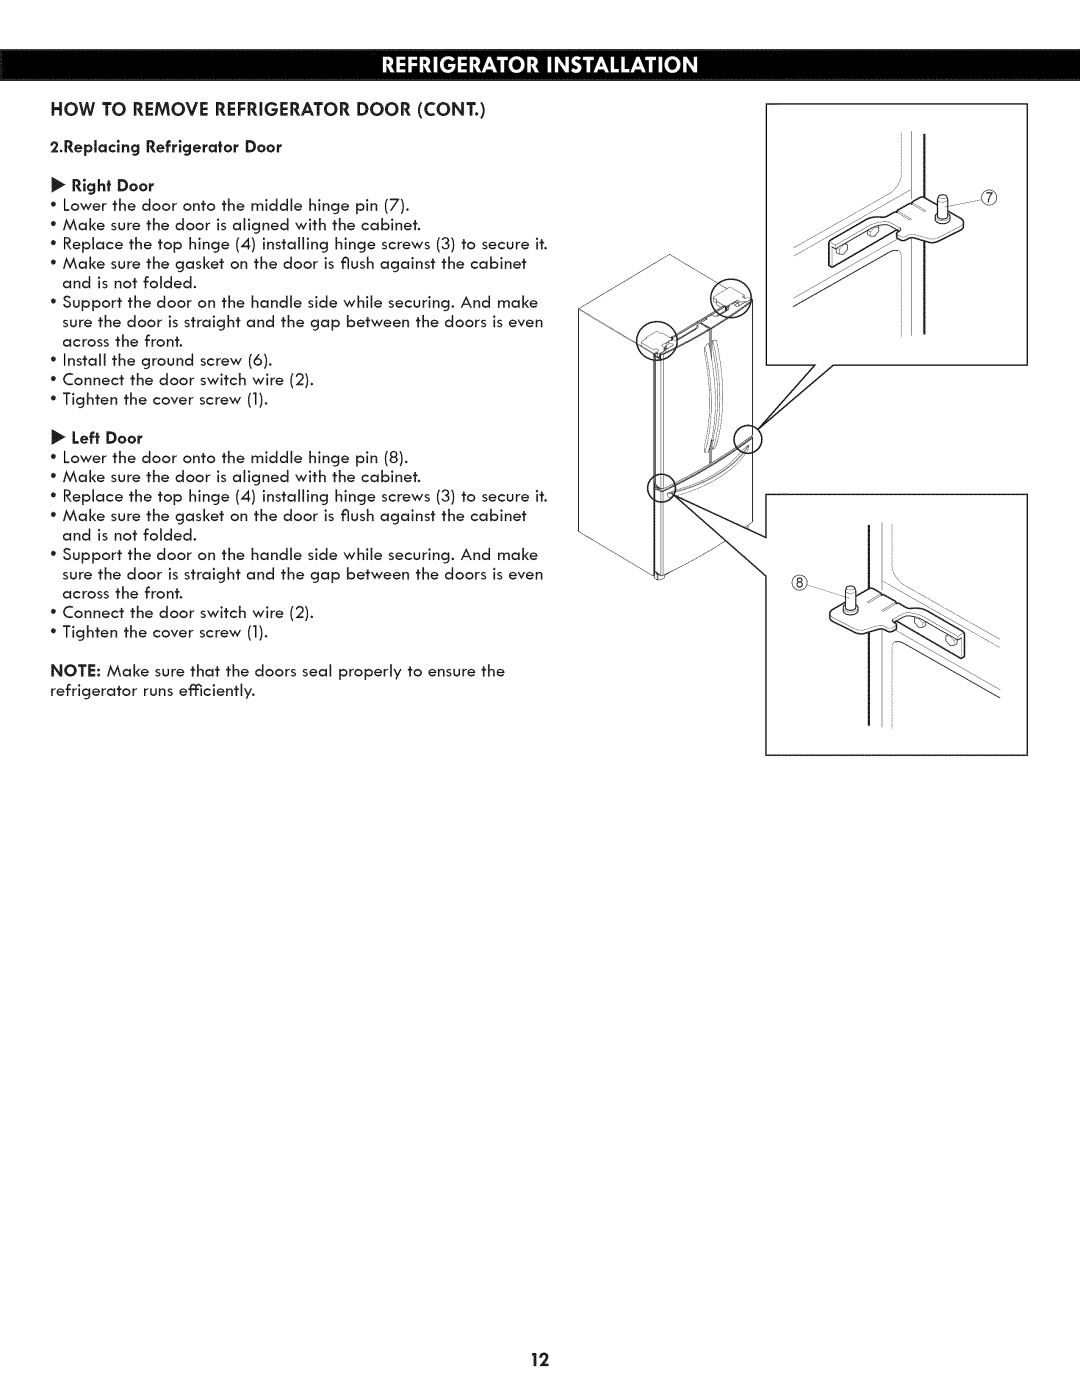 Kenmore 795.7130 manual How To Remove Refrigerator Door Cont, Replaclng 